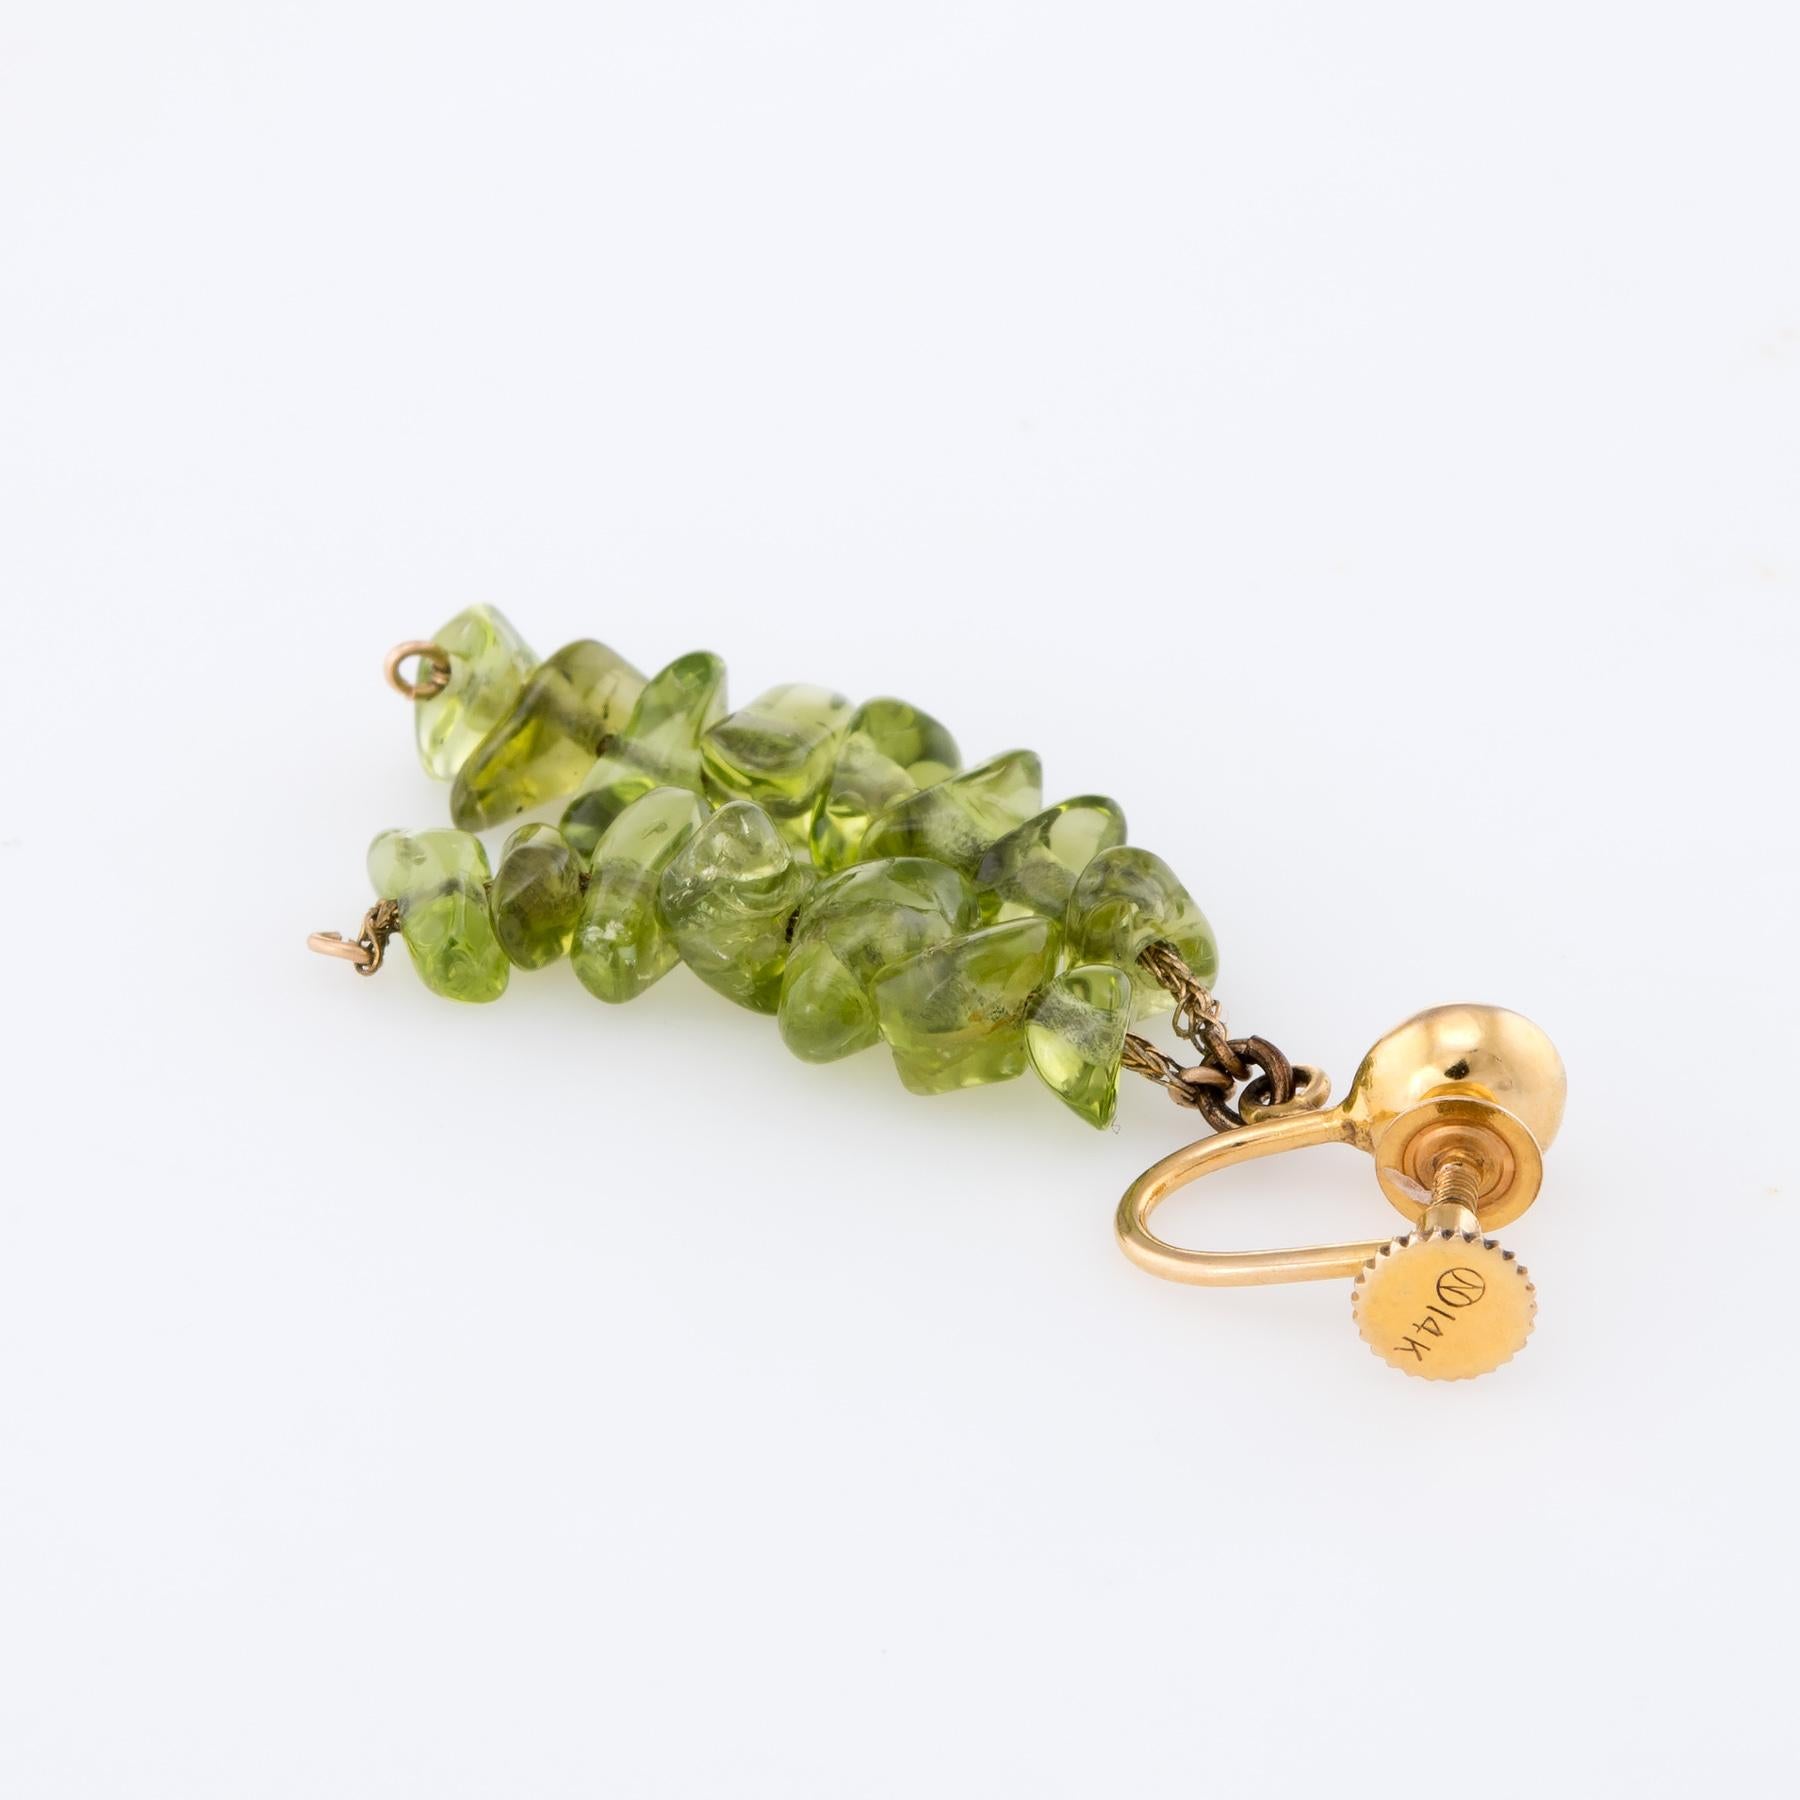 Elegant pair of vintage peridot drop earrings, crafted in 14k yellow gold. 

Freeform natural peridot is polished smooth. The peridot ranges in size from 8mm x 4mm (average).  

The earrings feature screw backings.

The earrings are in excellent